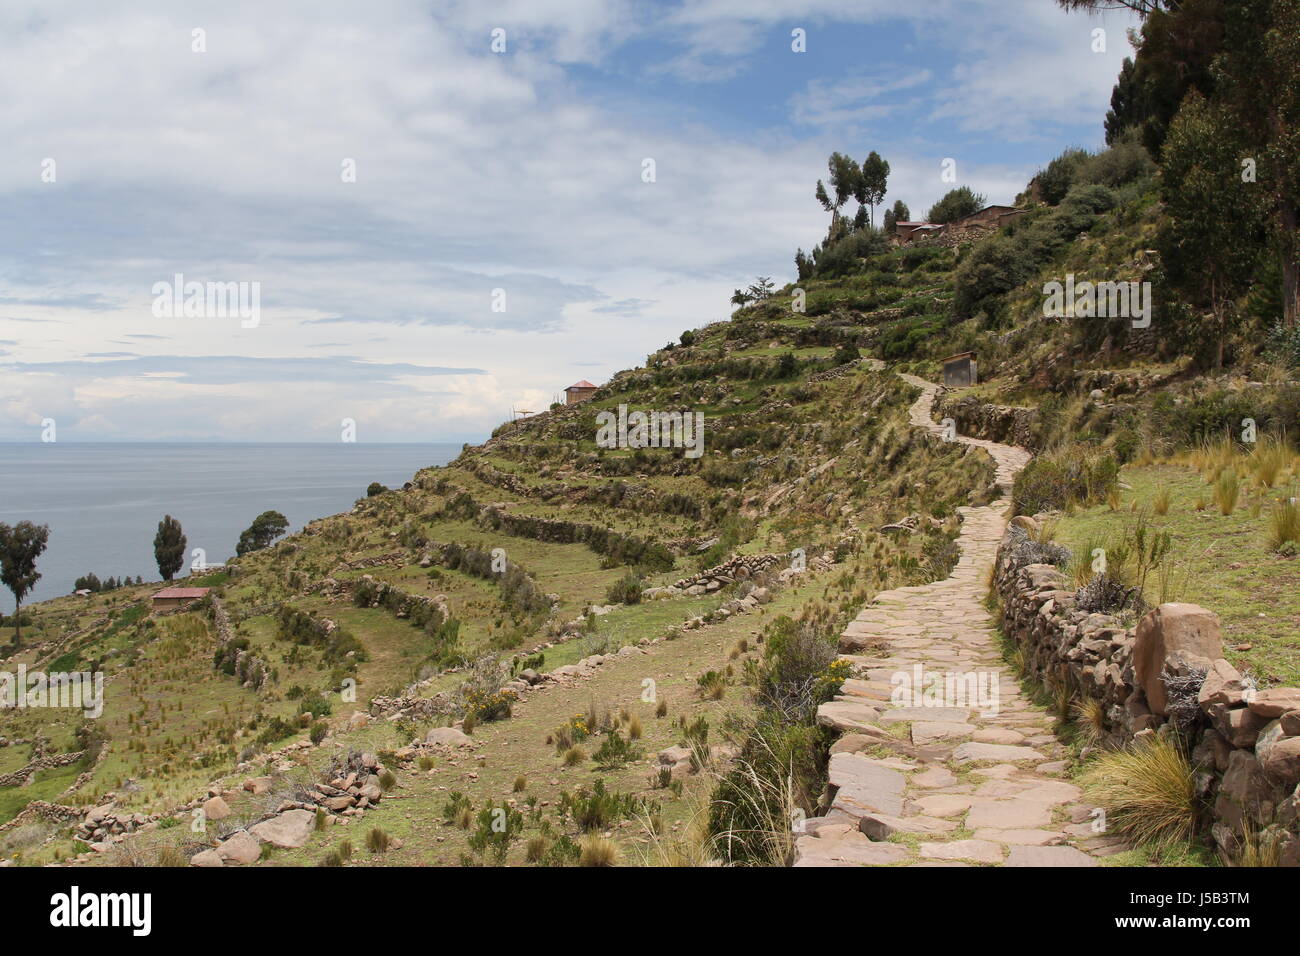 Insel Taquile Stockfoto